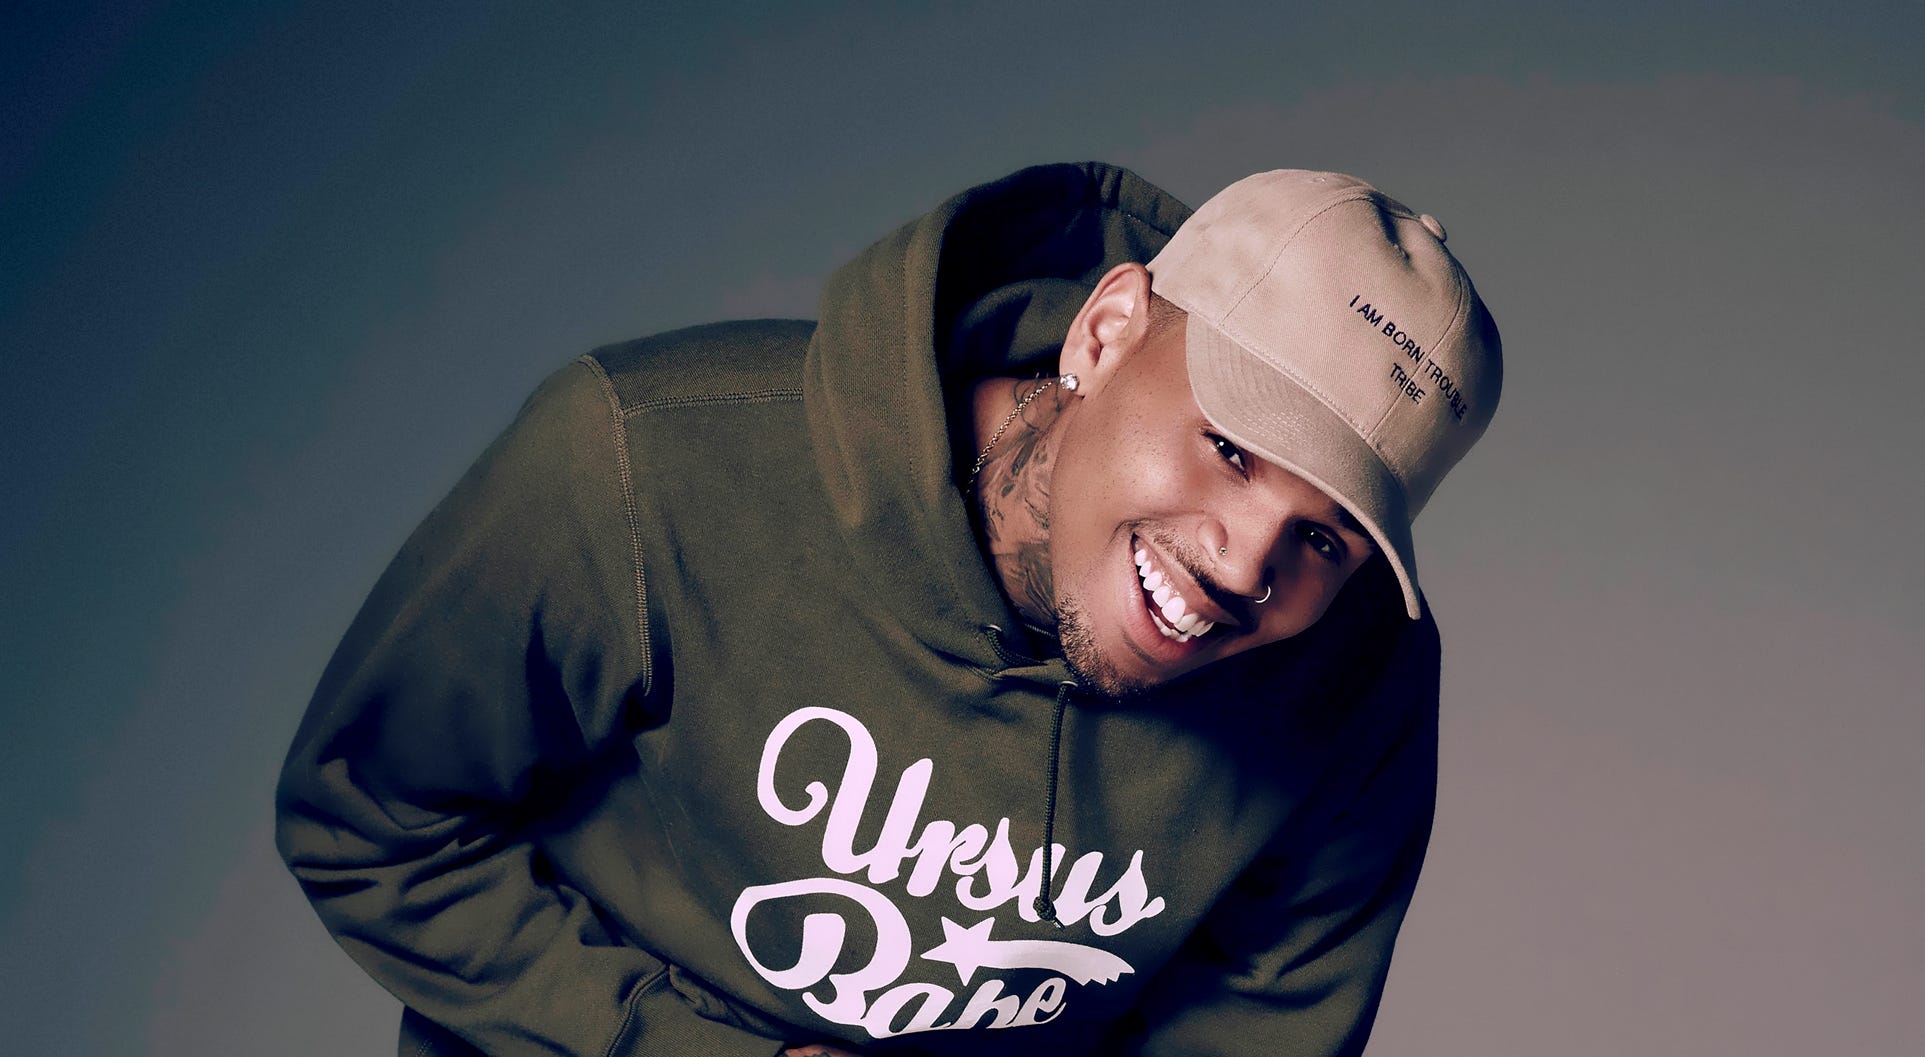 Chris Brown's Top 5 Music Videos. “I don't see how you can hate from… | by  Kenneth Velez | GeniusTalk | Medium